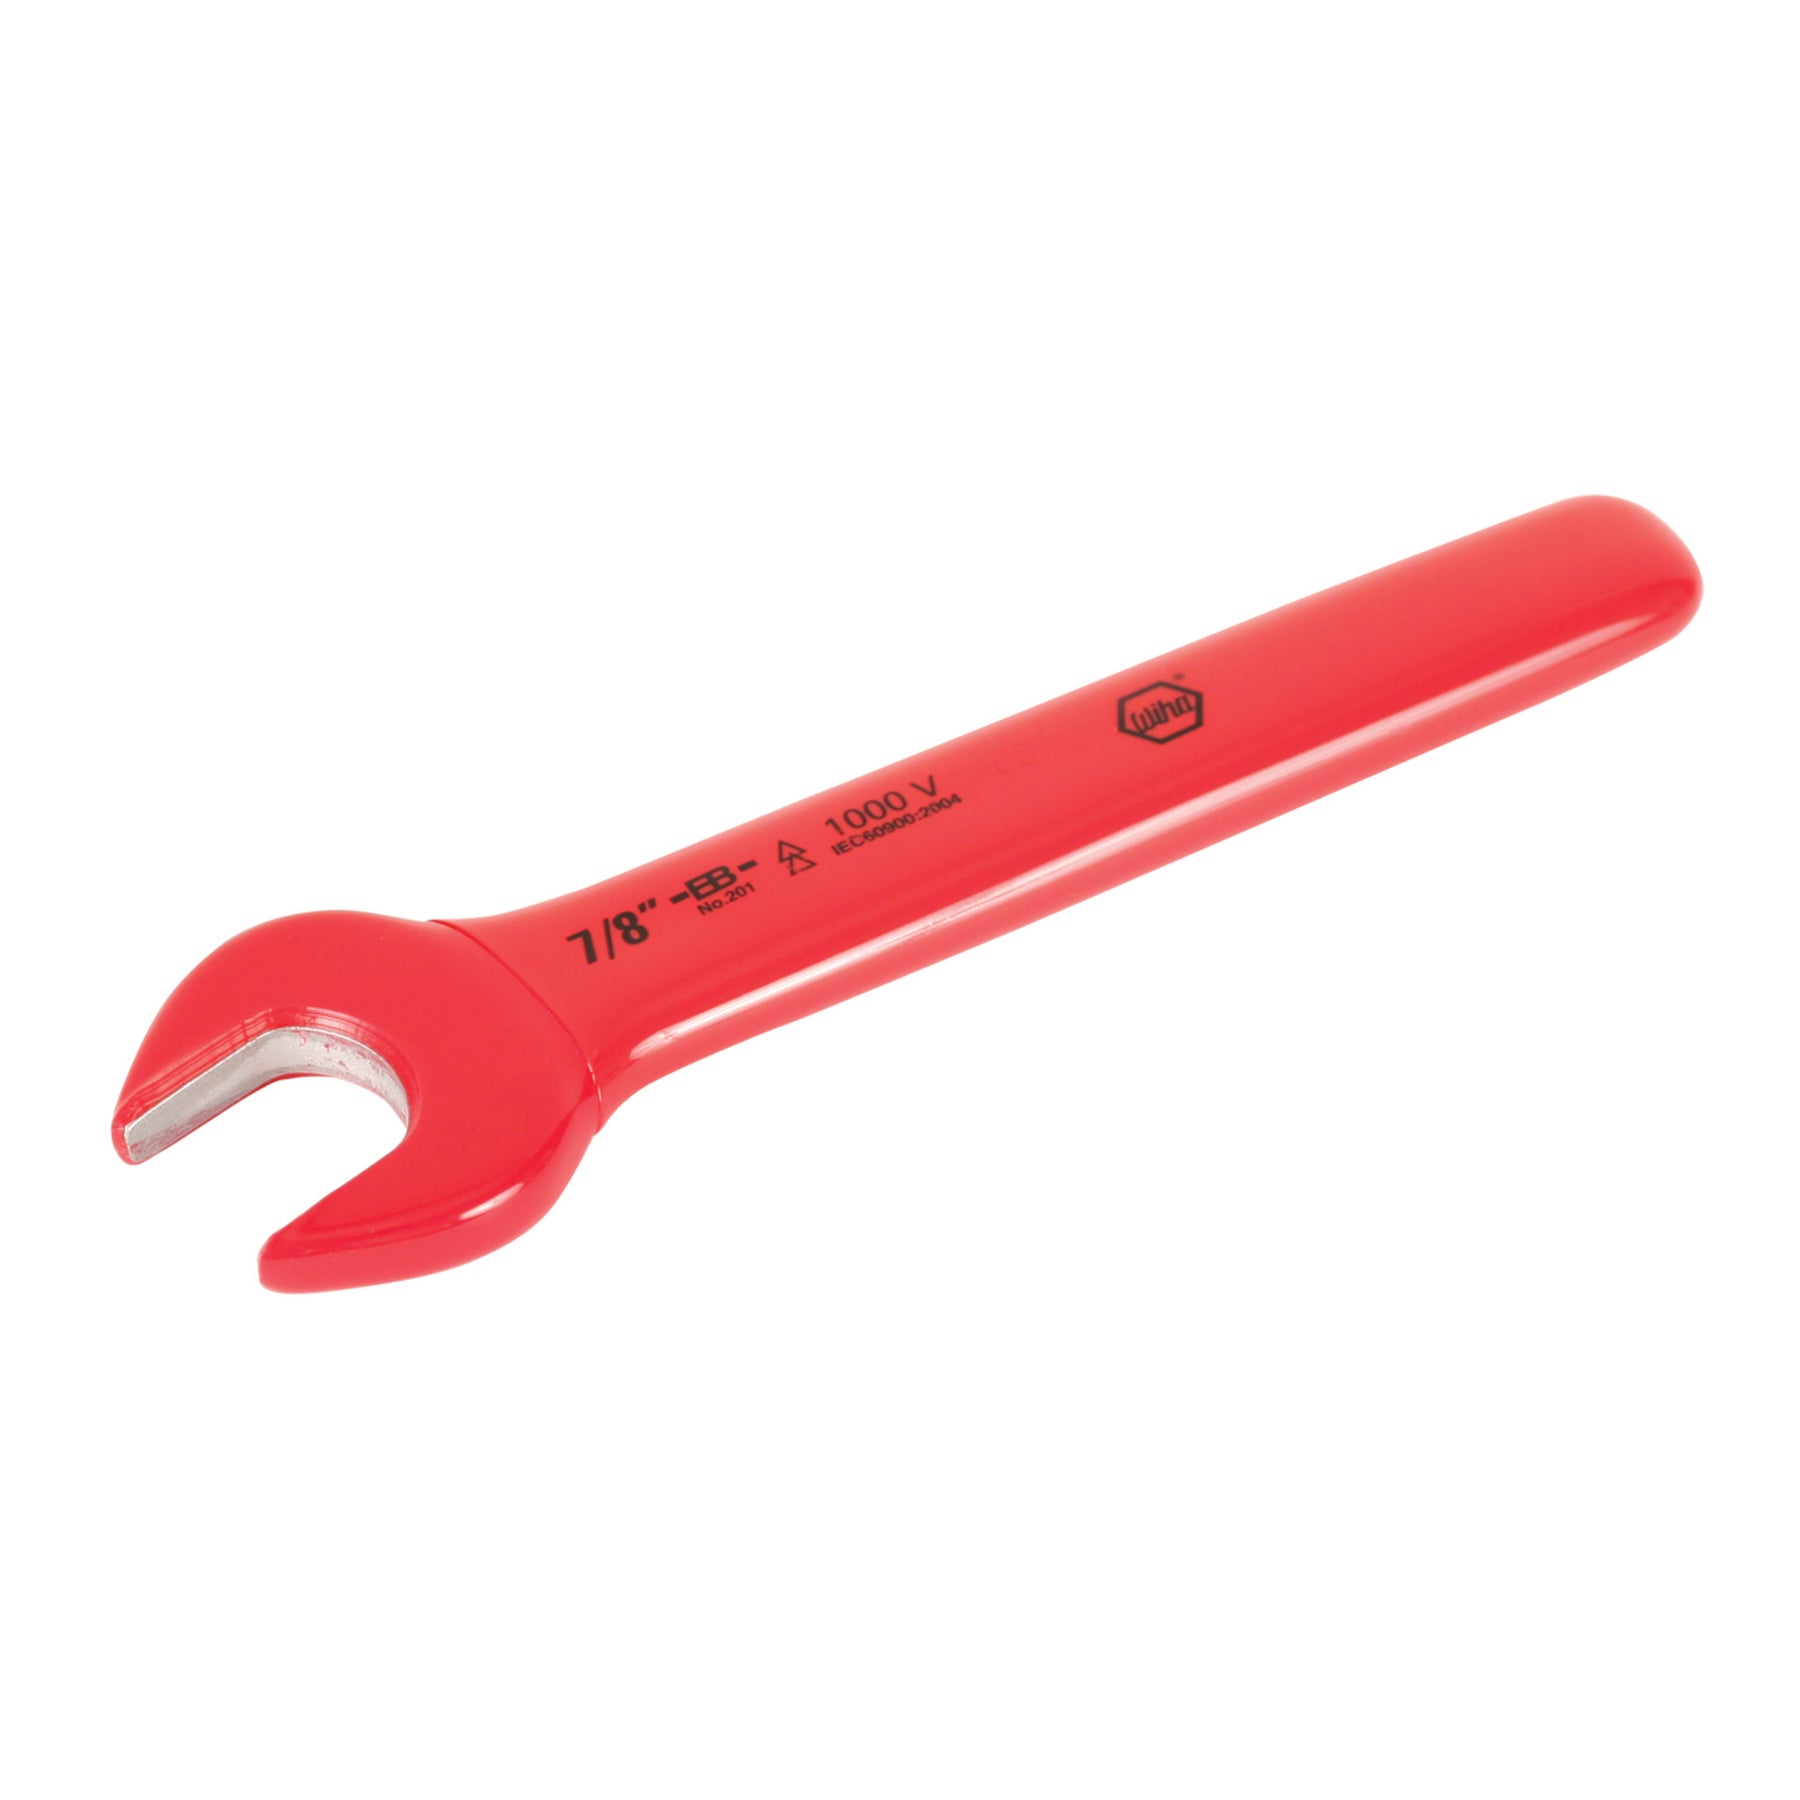 Insulated Open End Wrench 1-1/8"